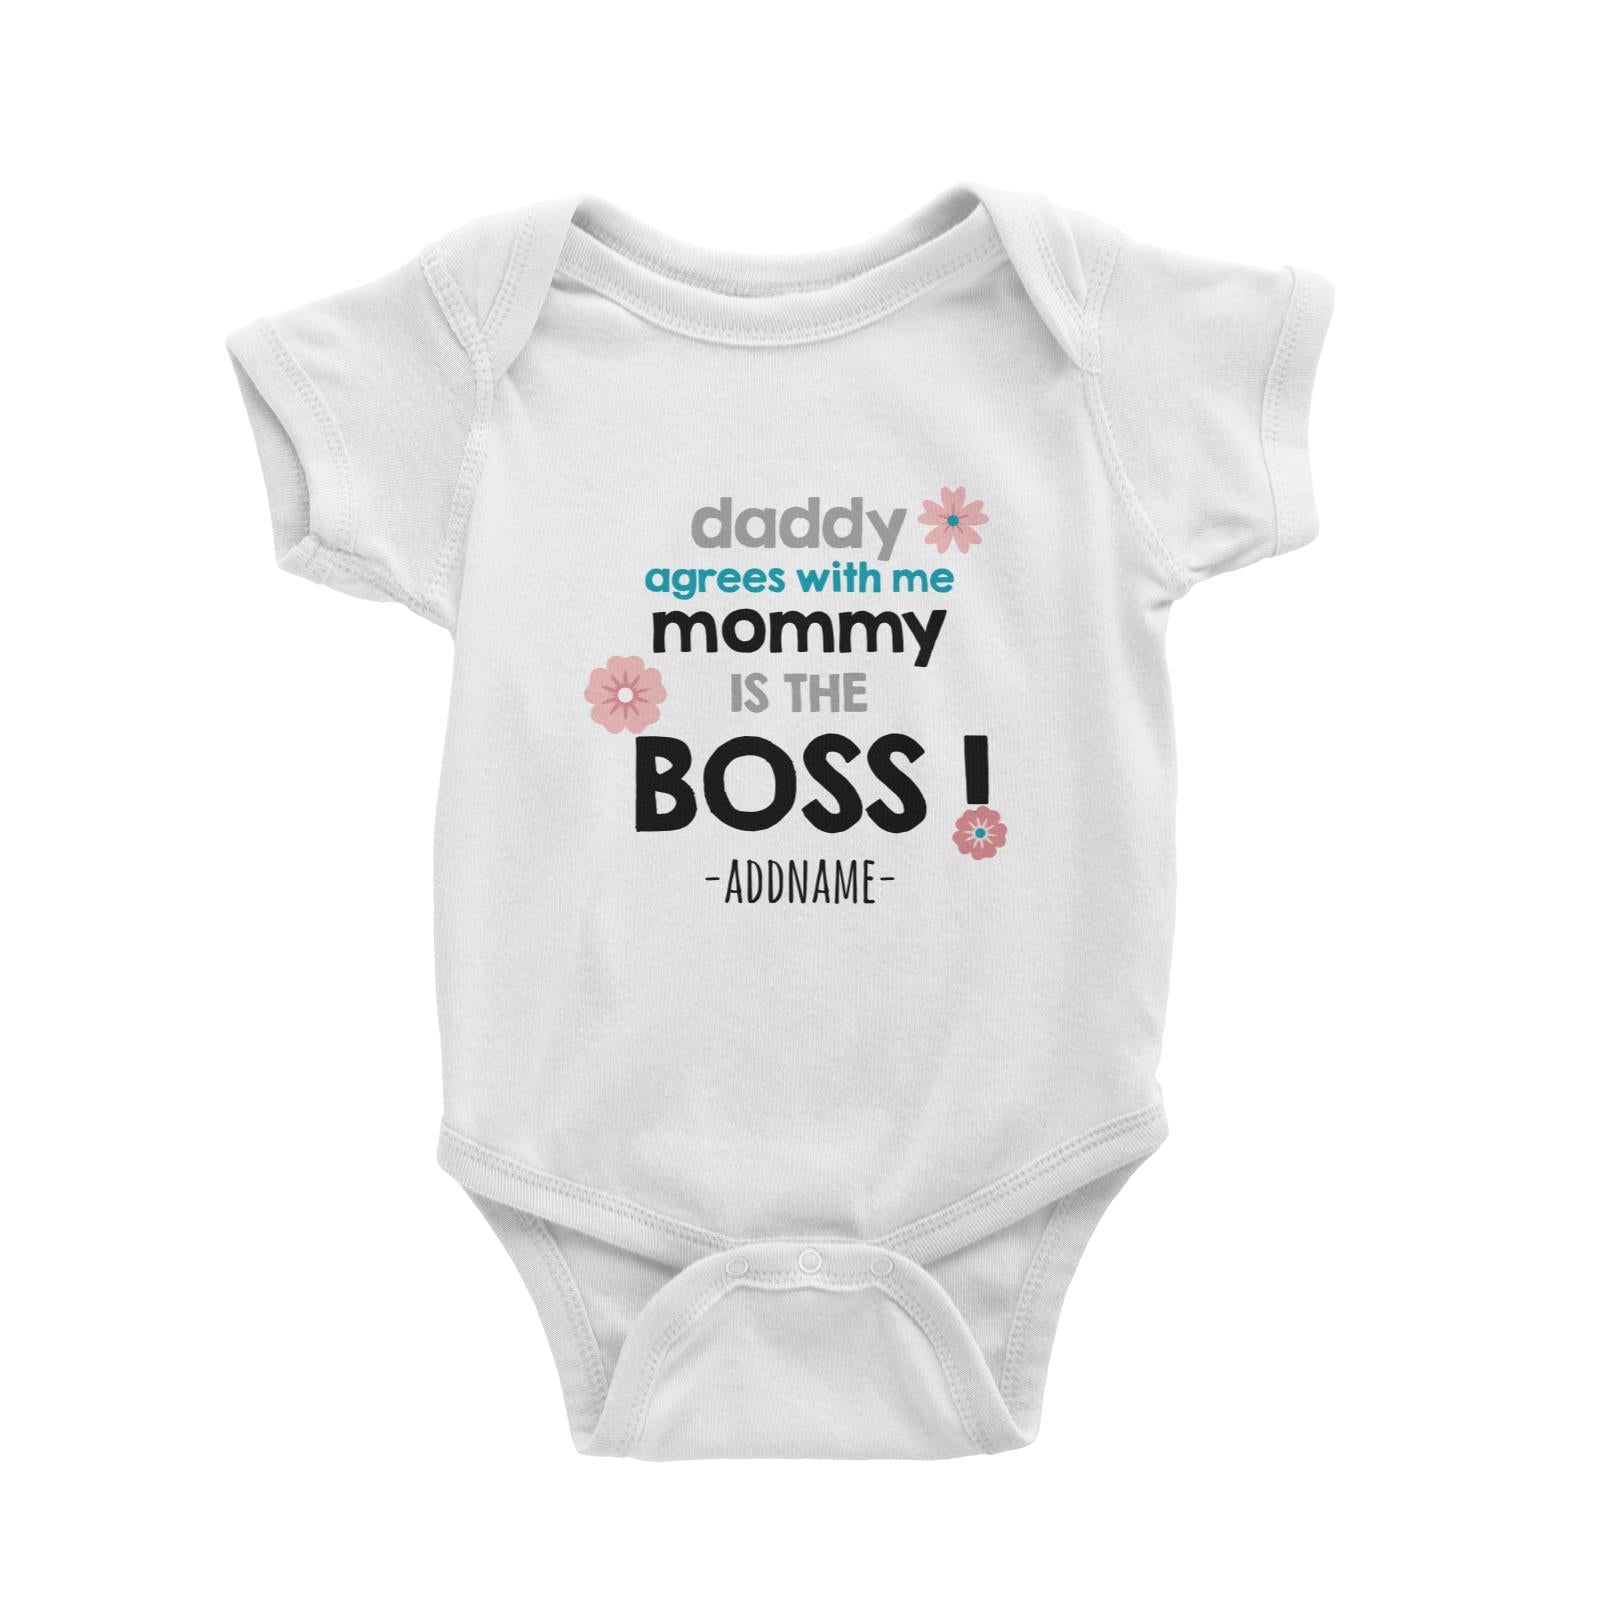 Daddy Agrees with Me Mommy is the Boss Addname Baby Romper Personalizable Designs Basic Newborn